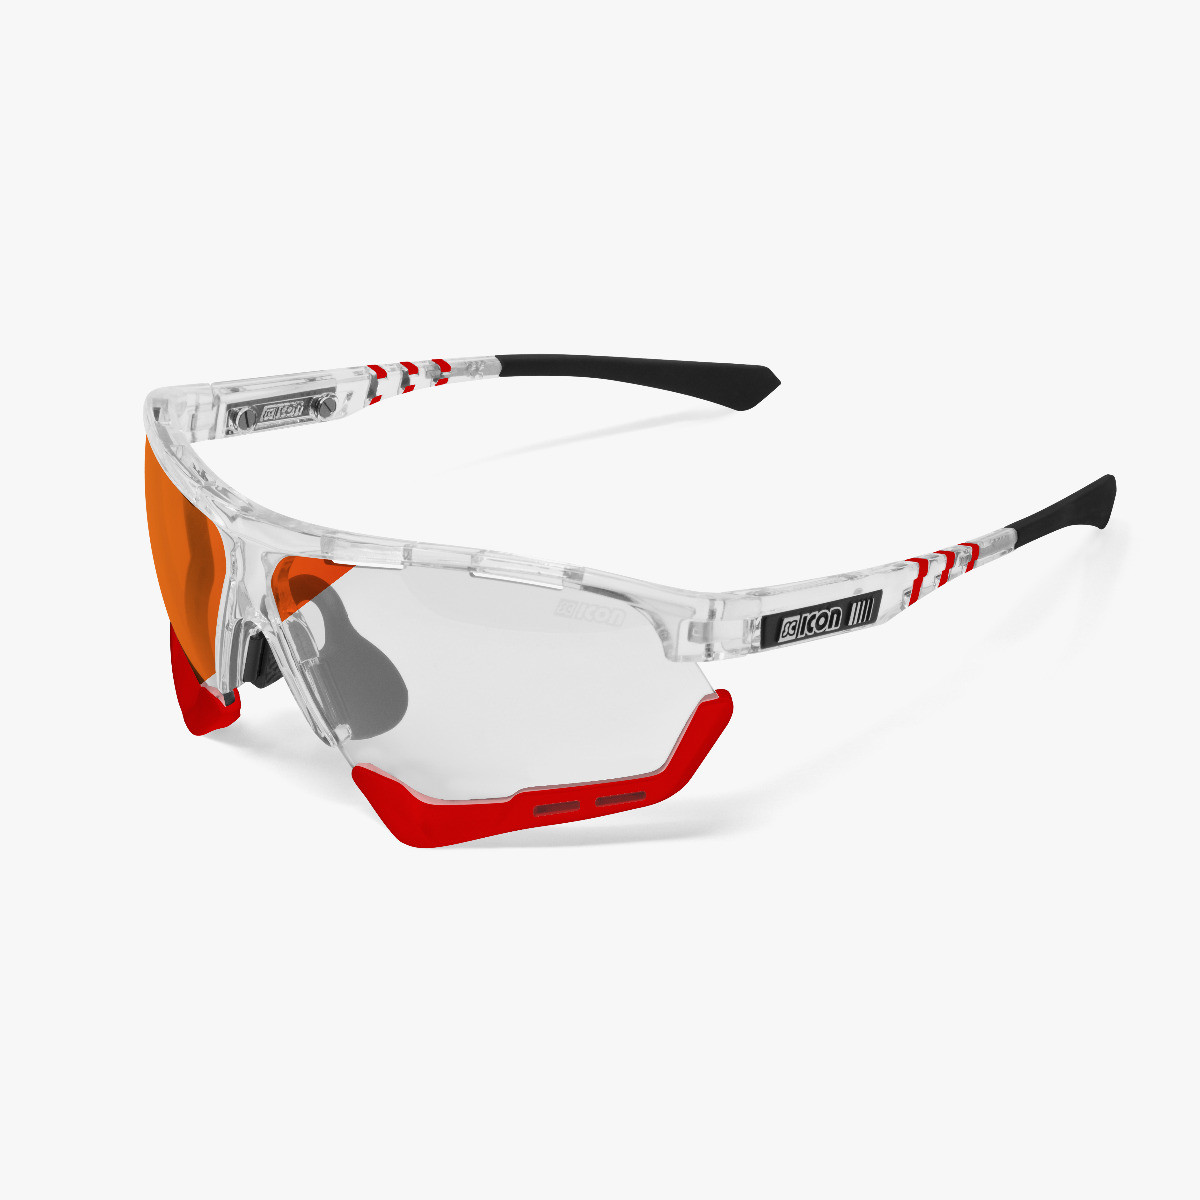 Scicon Sports | Aerocomfort Sport Cycling Performance Sunglasses - Crystal Gloss / Photocromatic Red - EY15160703
